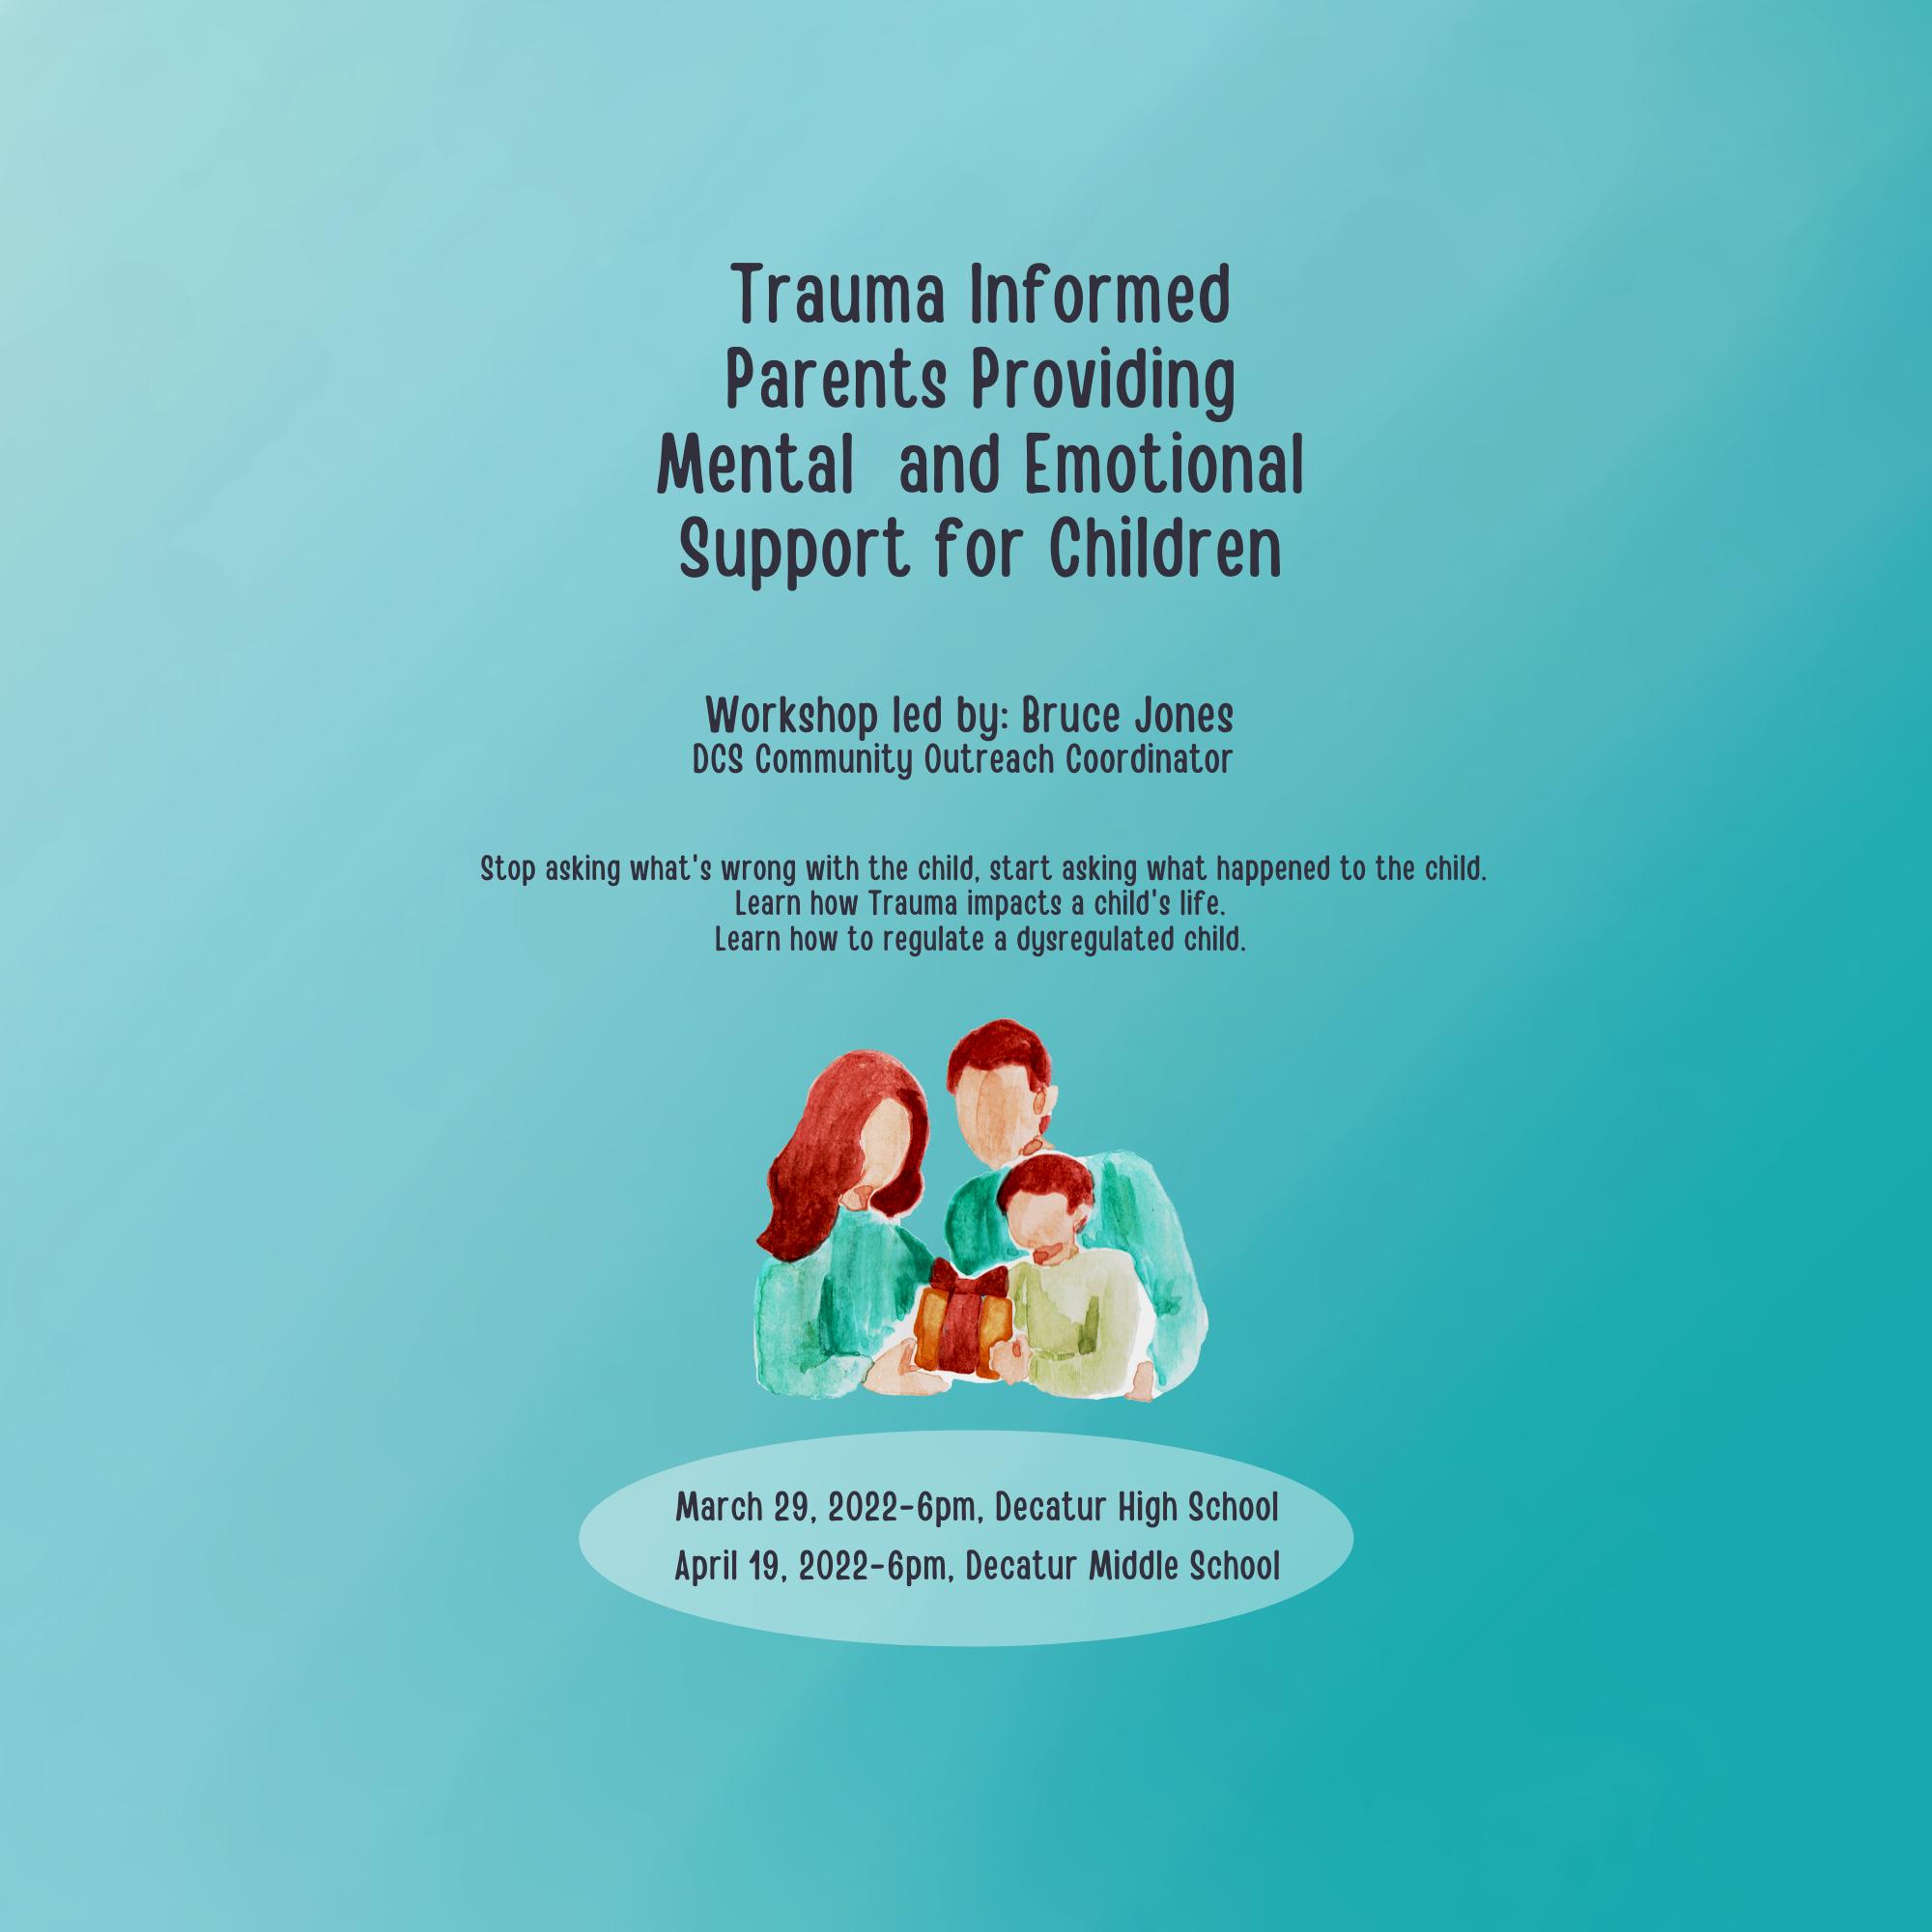 trauma informed practices - parents providing mental and emotional support for children. Workshop led by Bruce Jones, DCS Community Outreach Coordinator. Stop asking what's wrong with the child, start asking what happened to the child. Learn how Trauma impacts a child's life. Learn how to regulate a dysregulated child. March 29, 6pm at Decatur High School and April 19, 6pm at Decatur Middle School. 